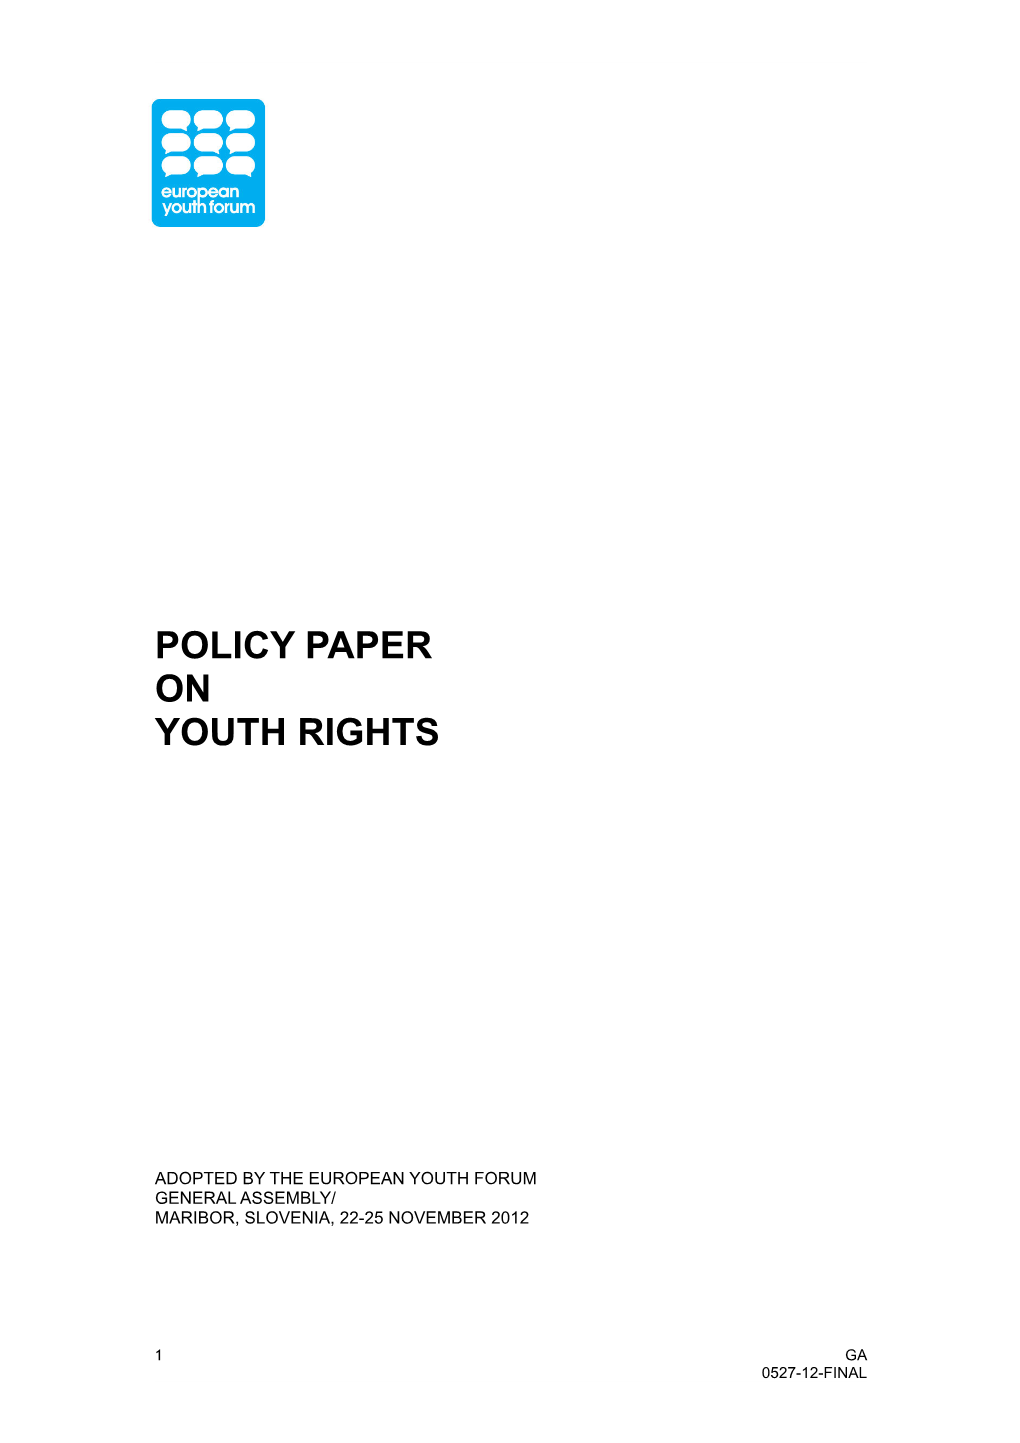 Policy Paper on Youth Rights